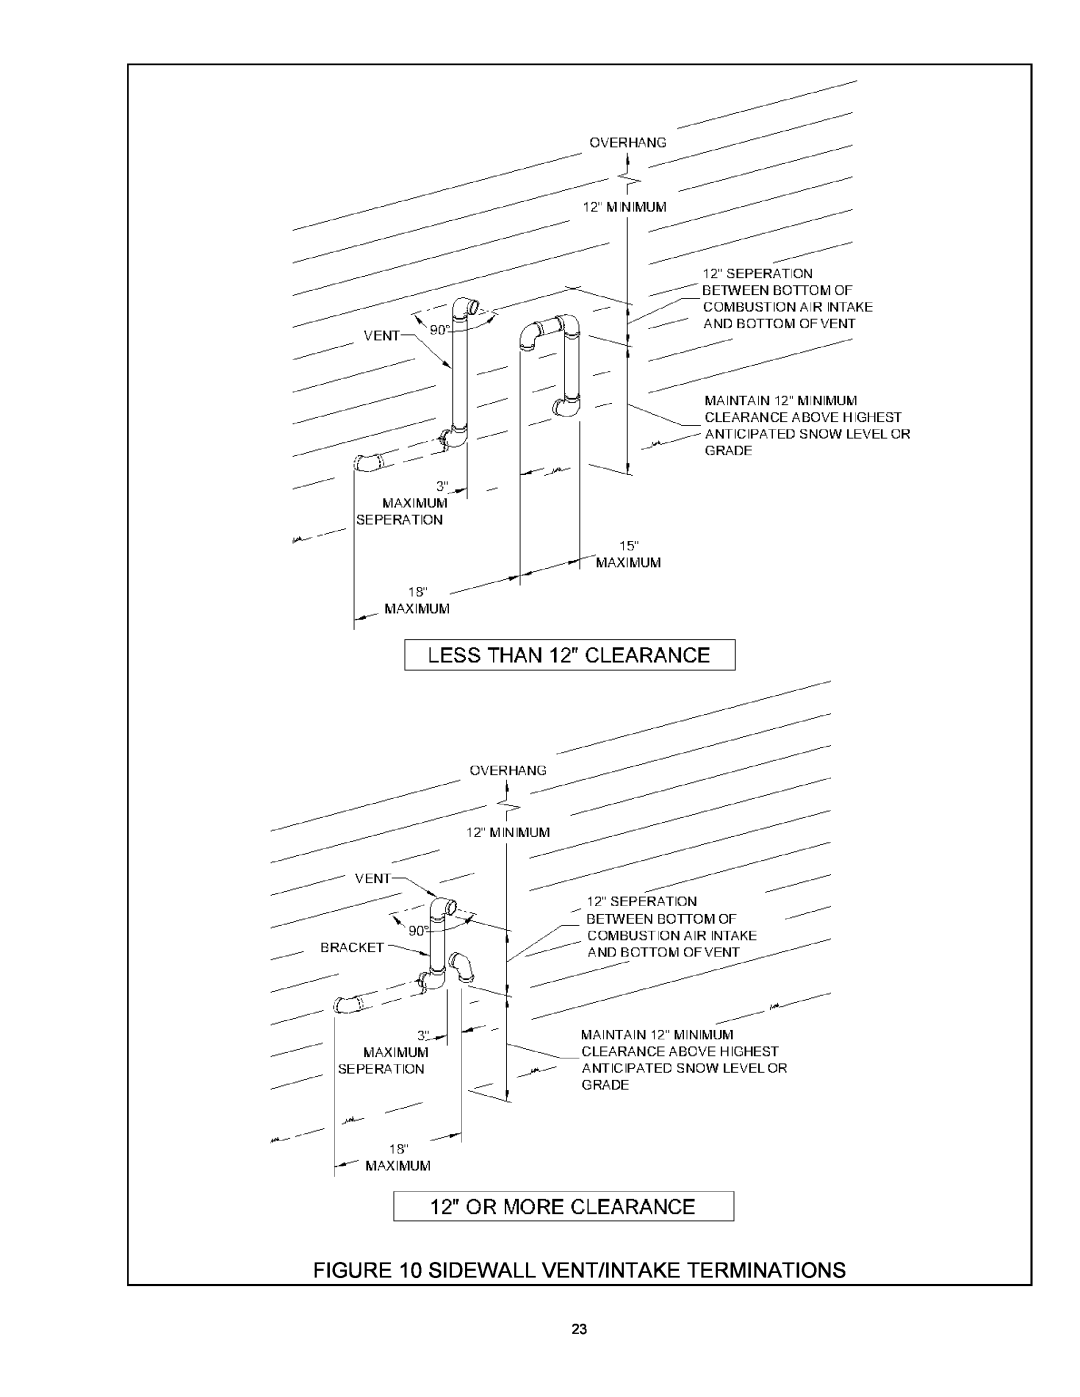 Quantum GAS-FIRED BOILERS installation instructions Sidewall Vent/Intake Terminations 